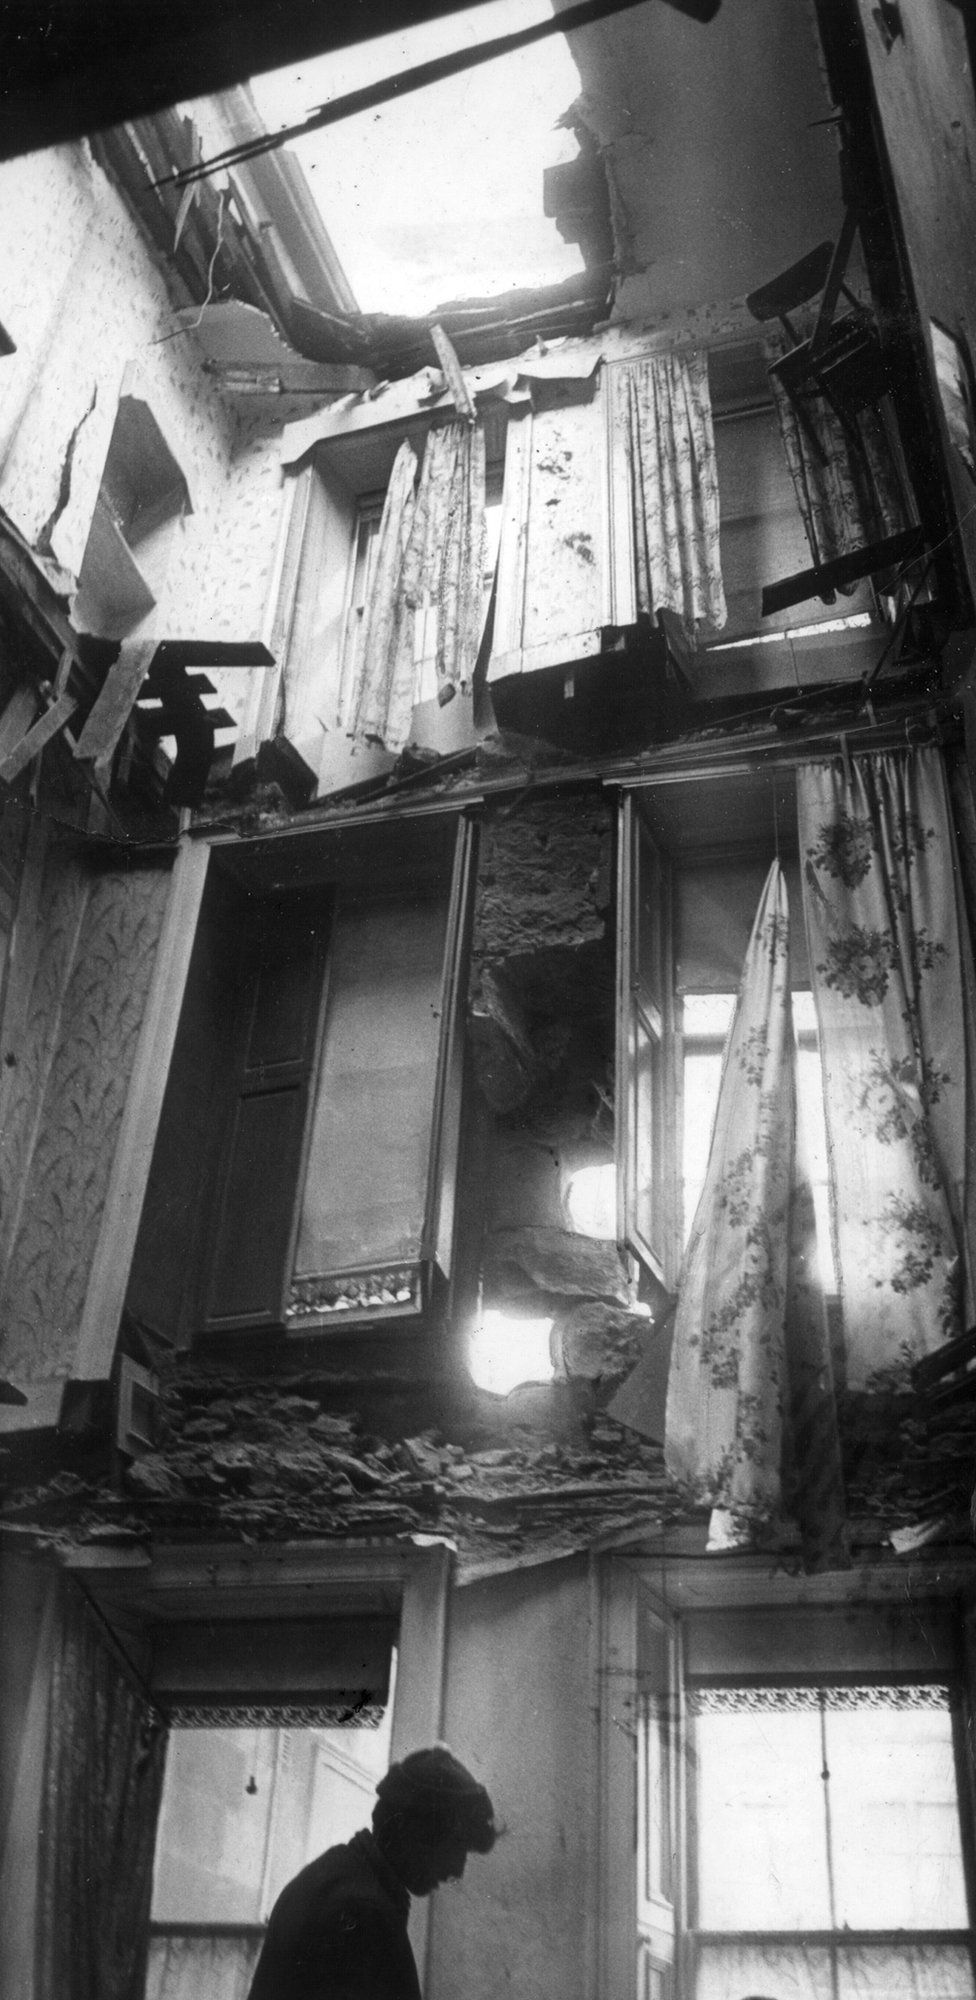 A workman inspects the damage inside a tenement building in Dumbarton Road.